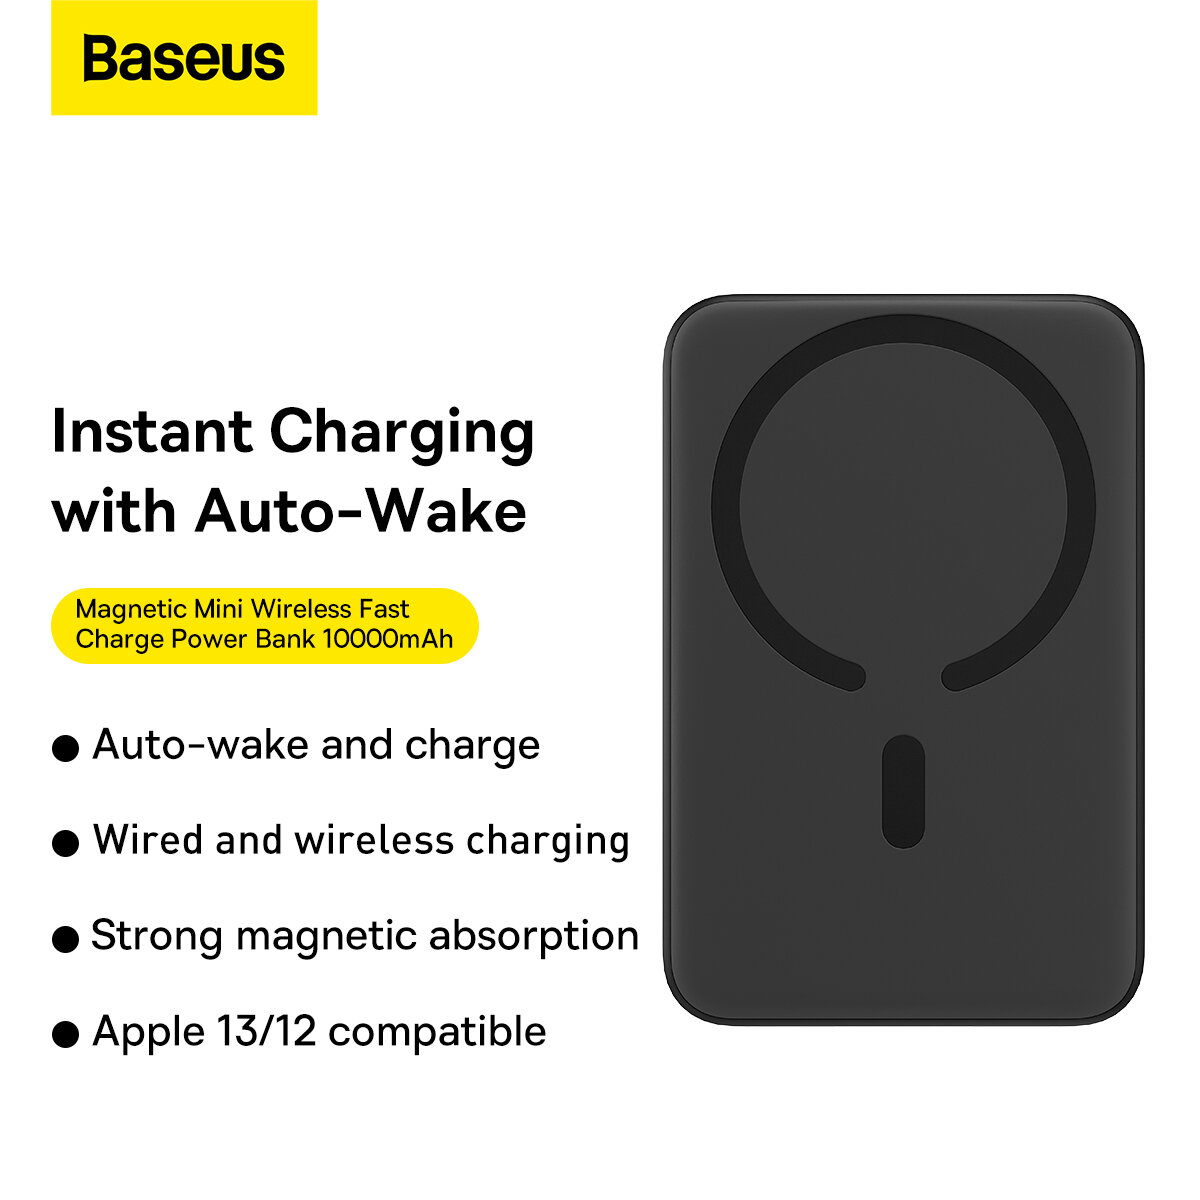 Baseus 20W 10000mAh Magnetic Mini Wireless Fast Charge Power Bank for iPhone 13 Pro Max for Samsung Galaxy Note S21 ultr